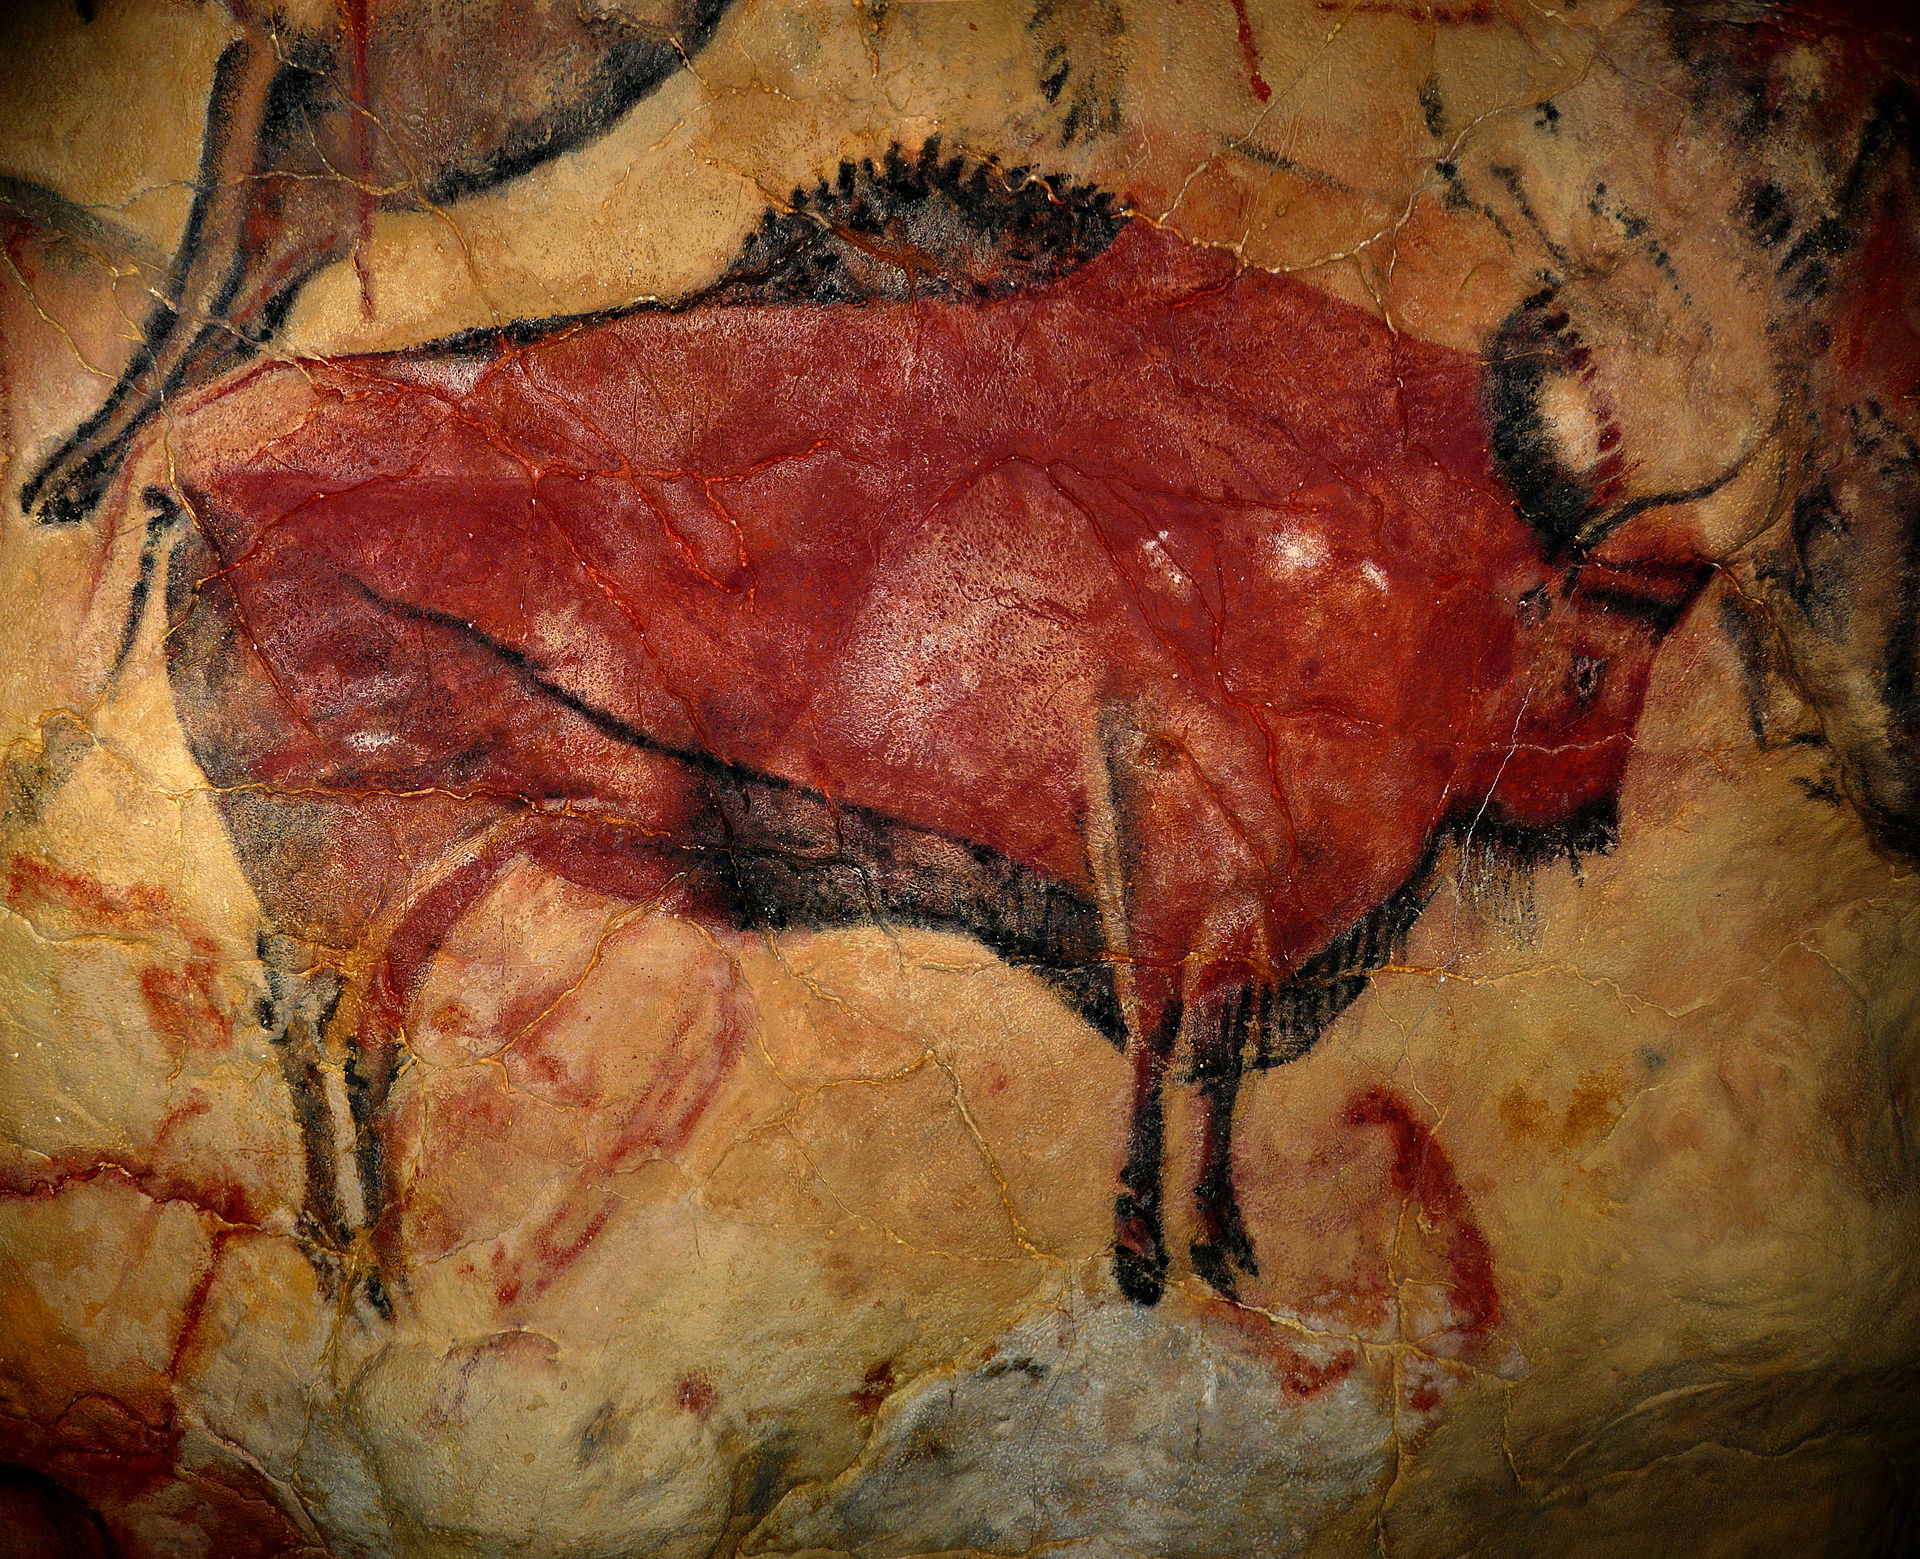 A bison figure painted with red pigment on a smooth tan-colored surface with some visible cracks. The painter also utilized black strokes to add detail. 